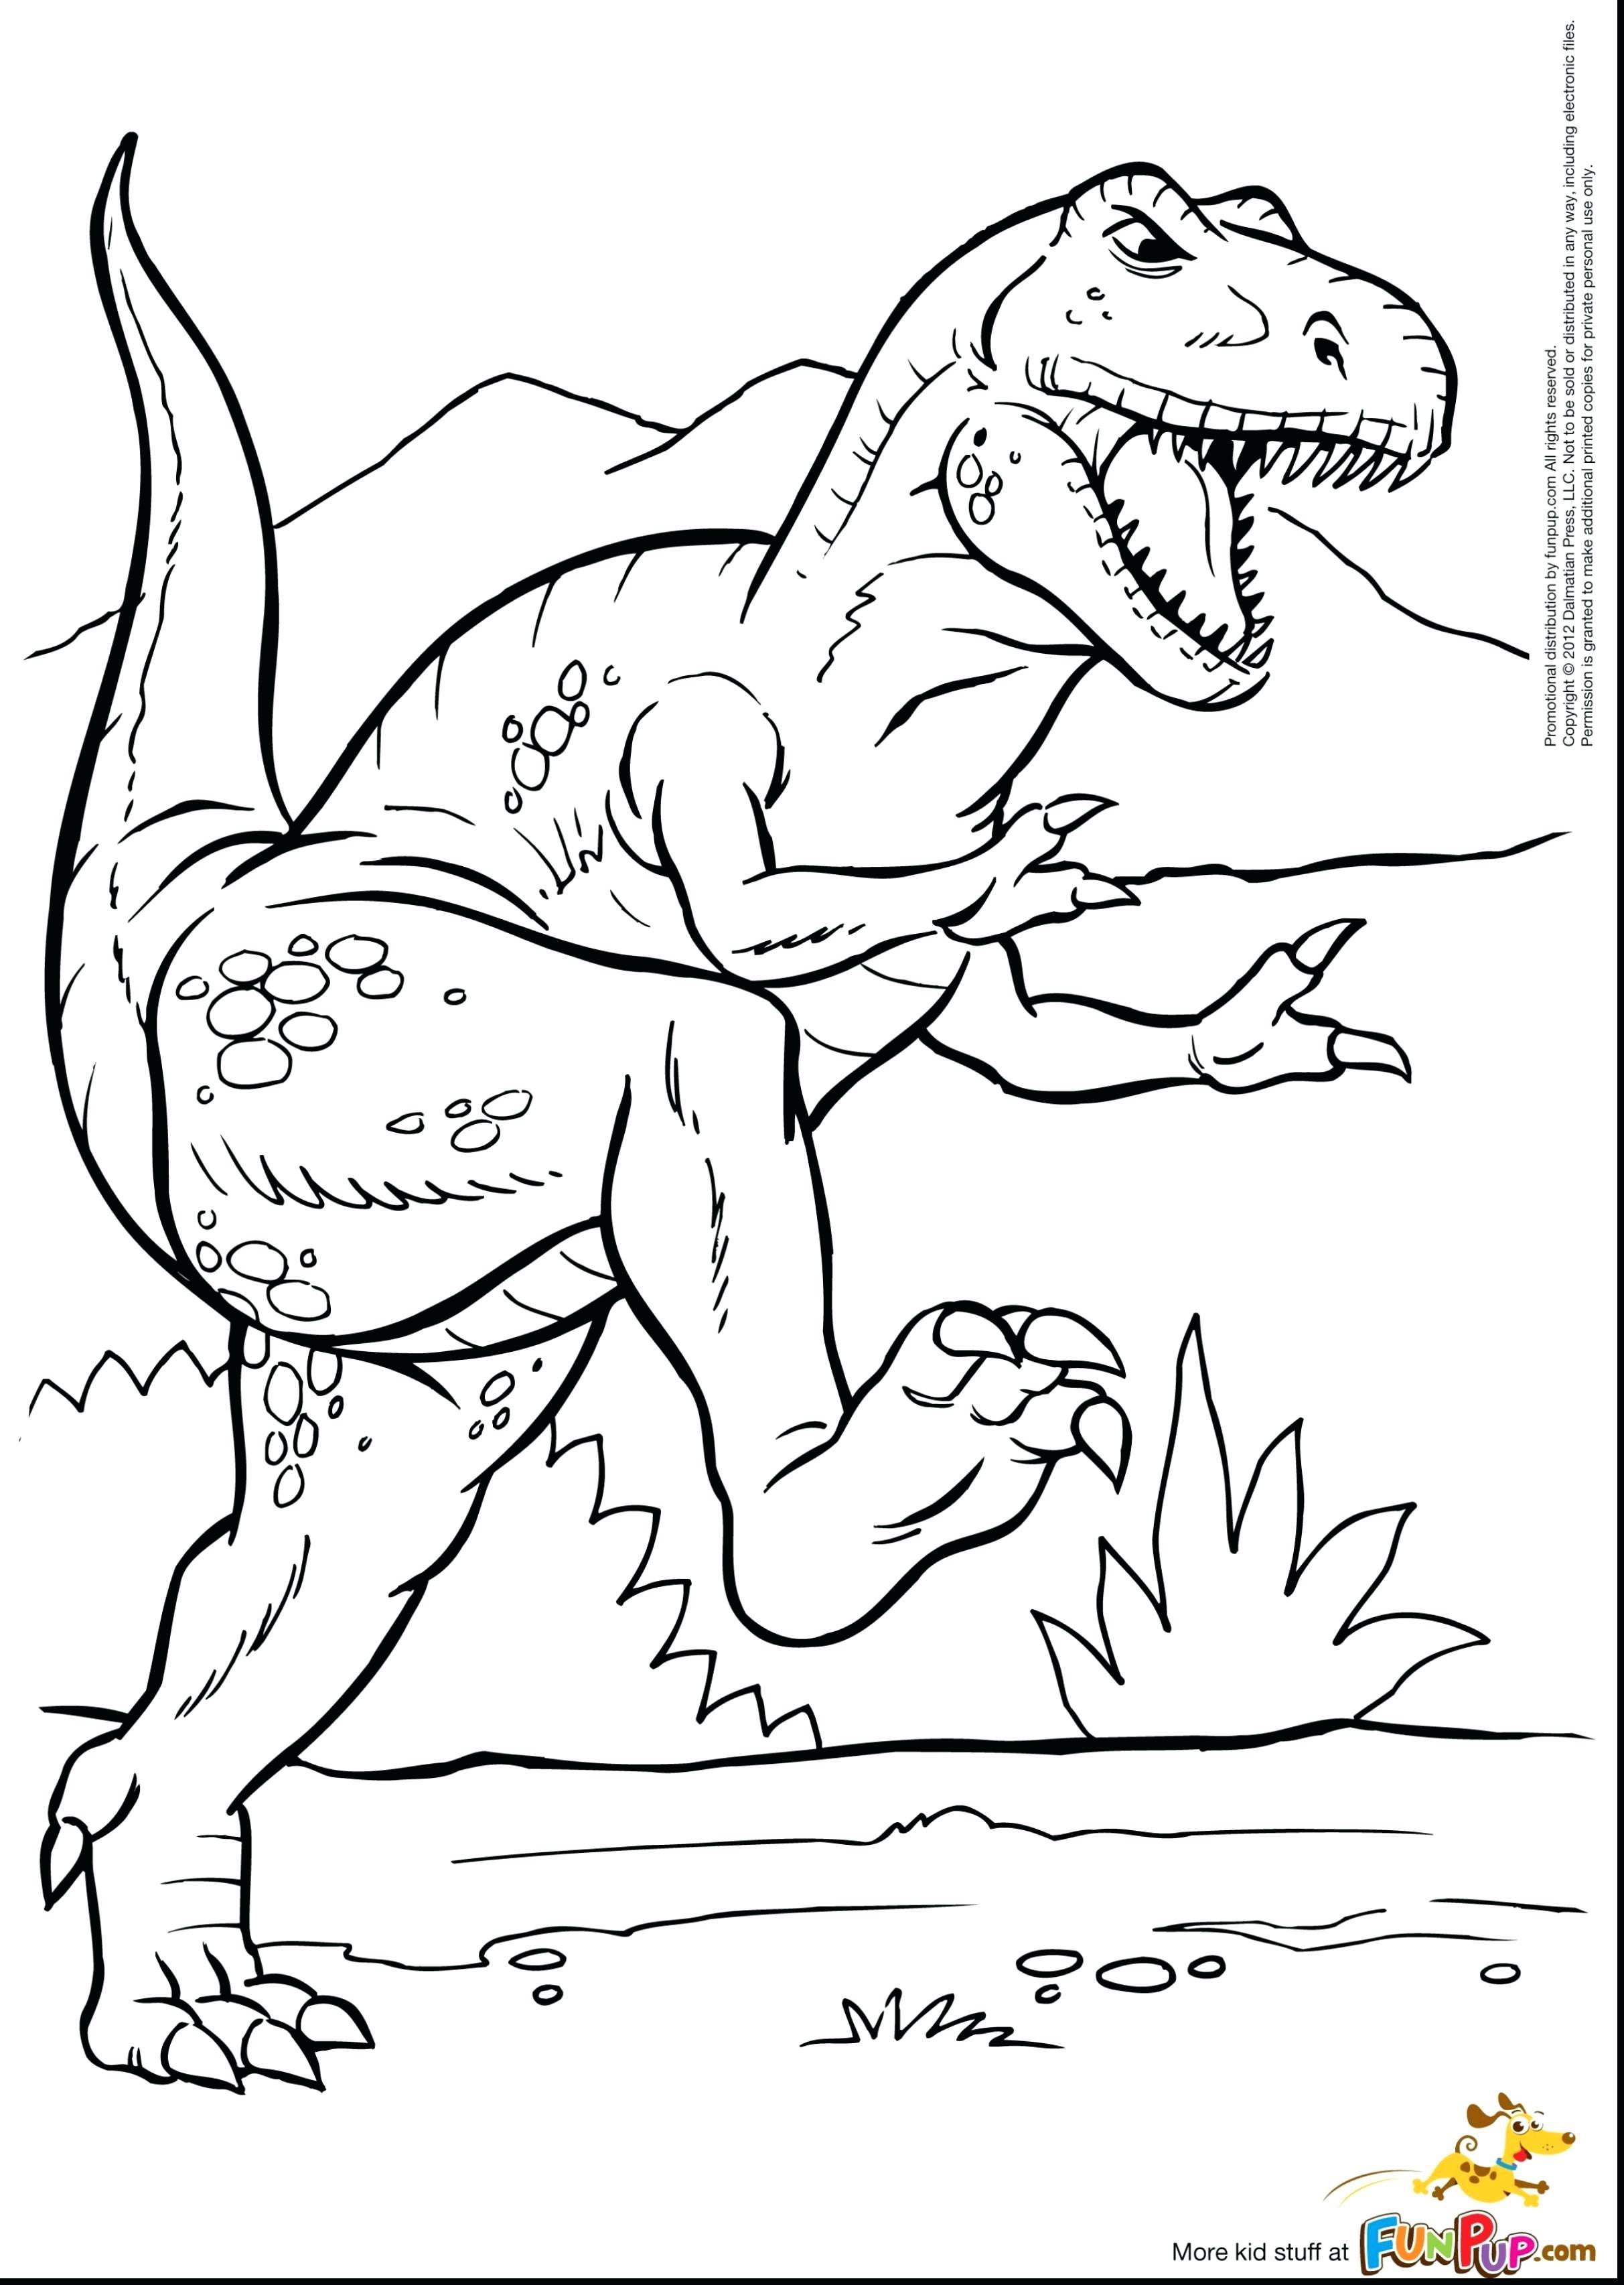 Lego T Rex Coloring Pages